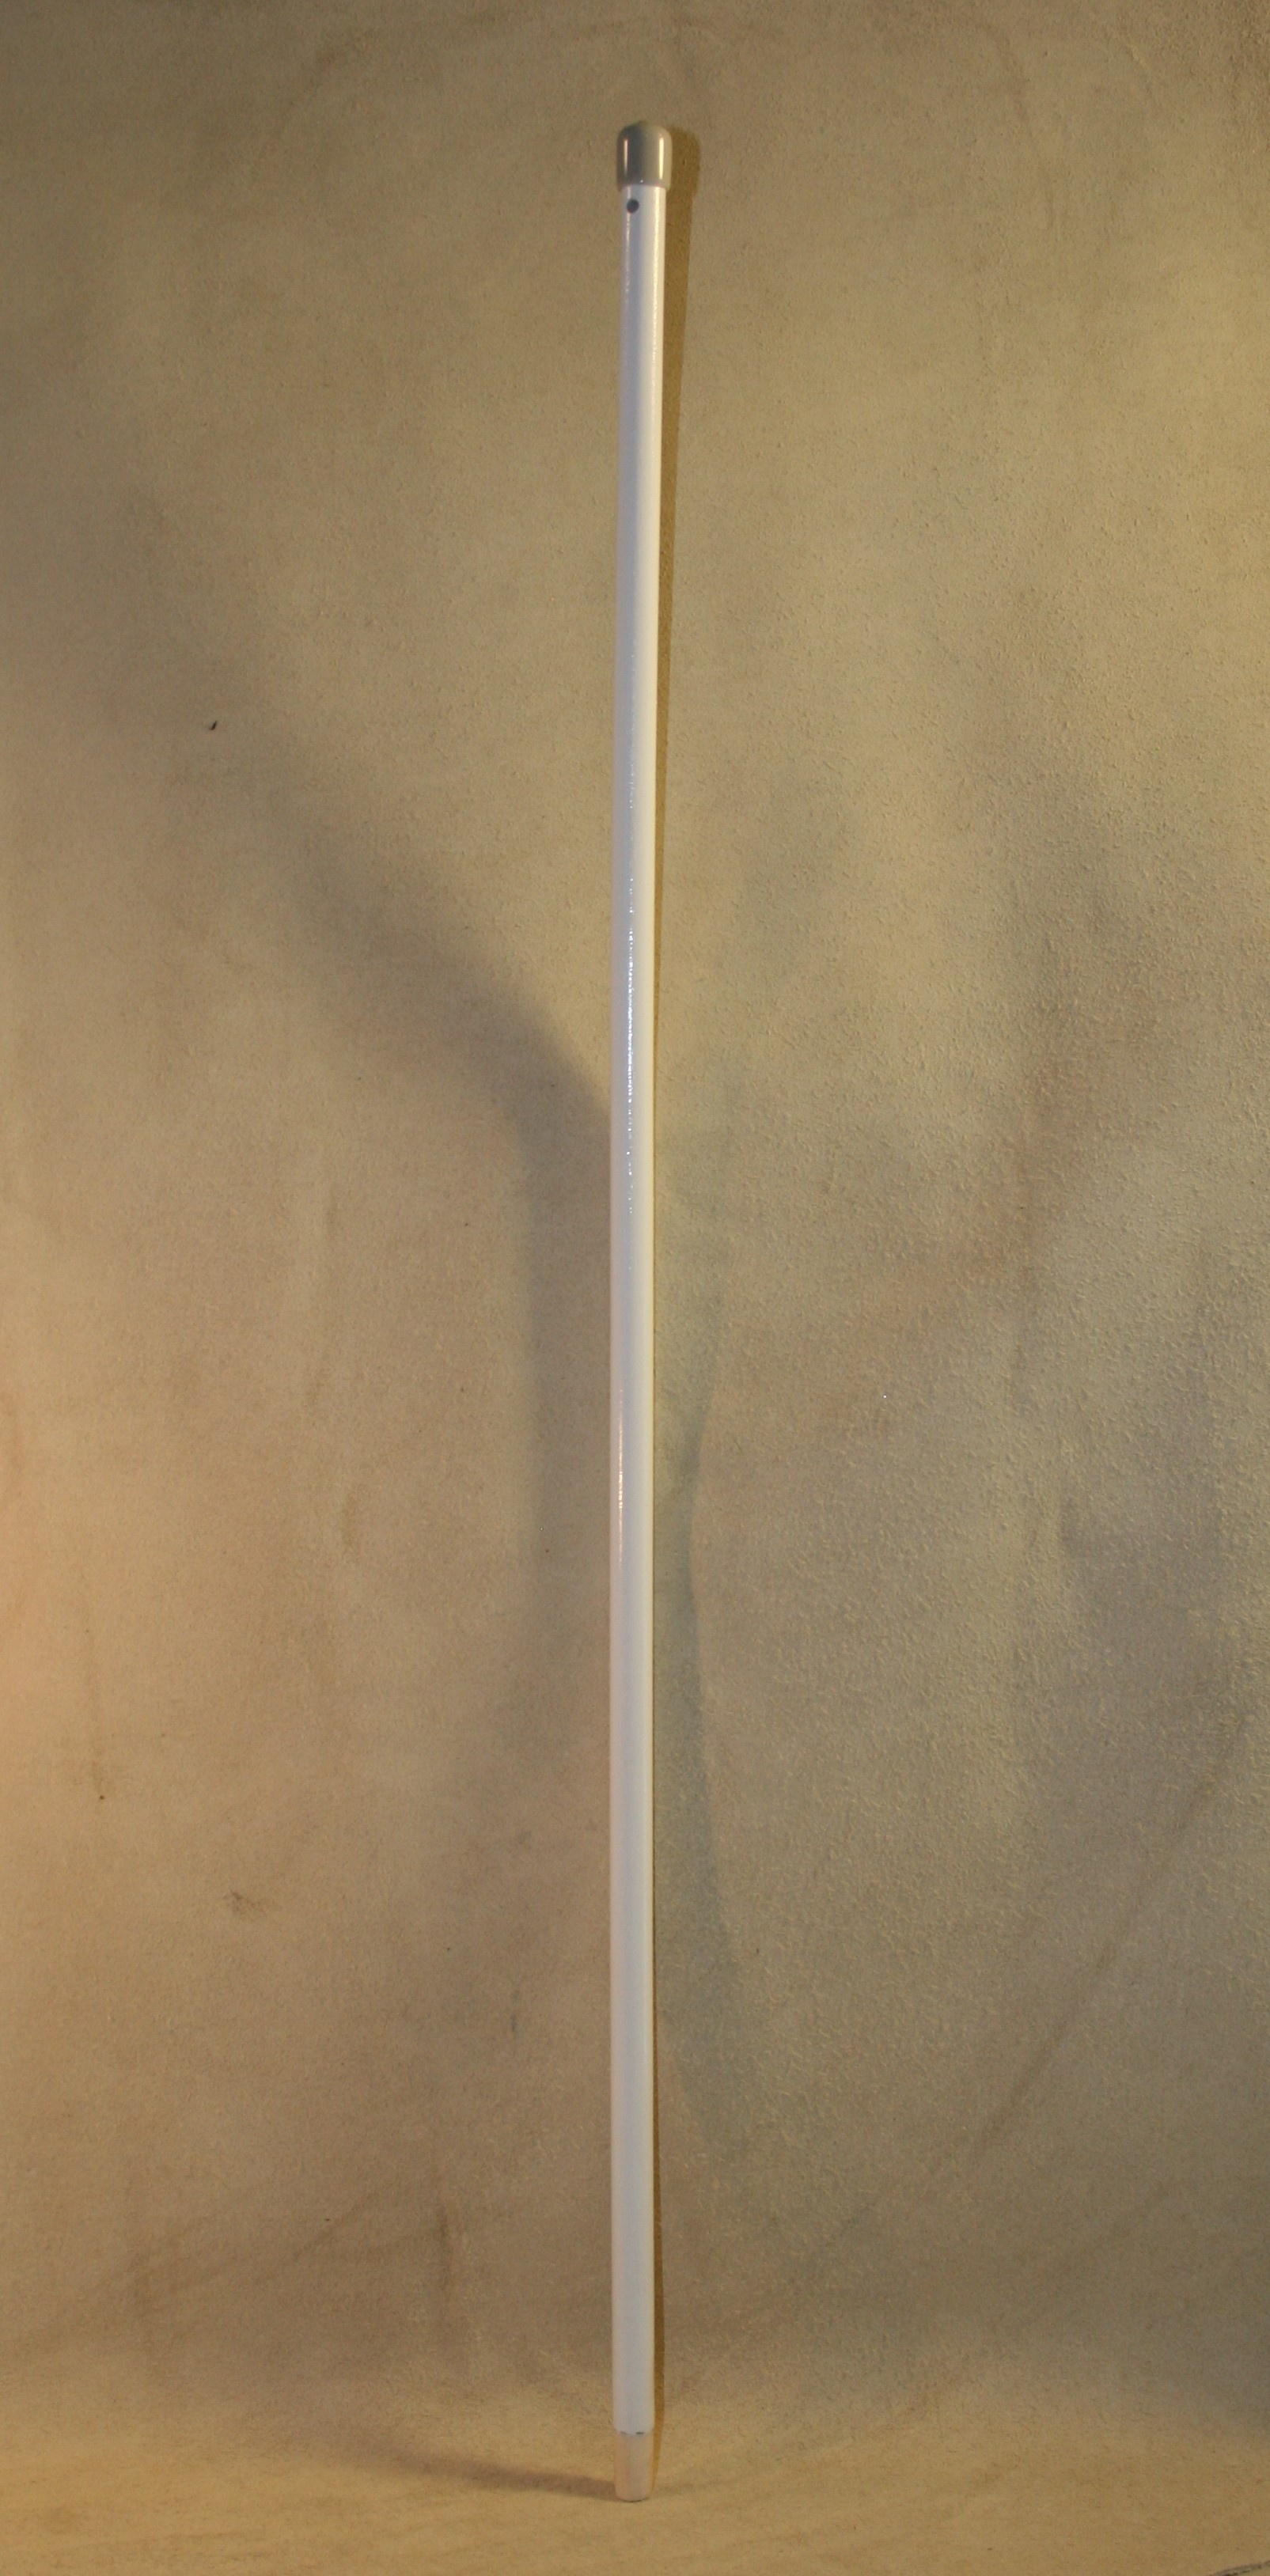 Upright dowel, height approx. 23 7/8" as shown